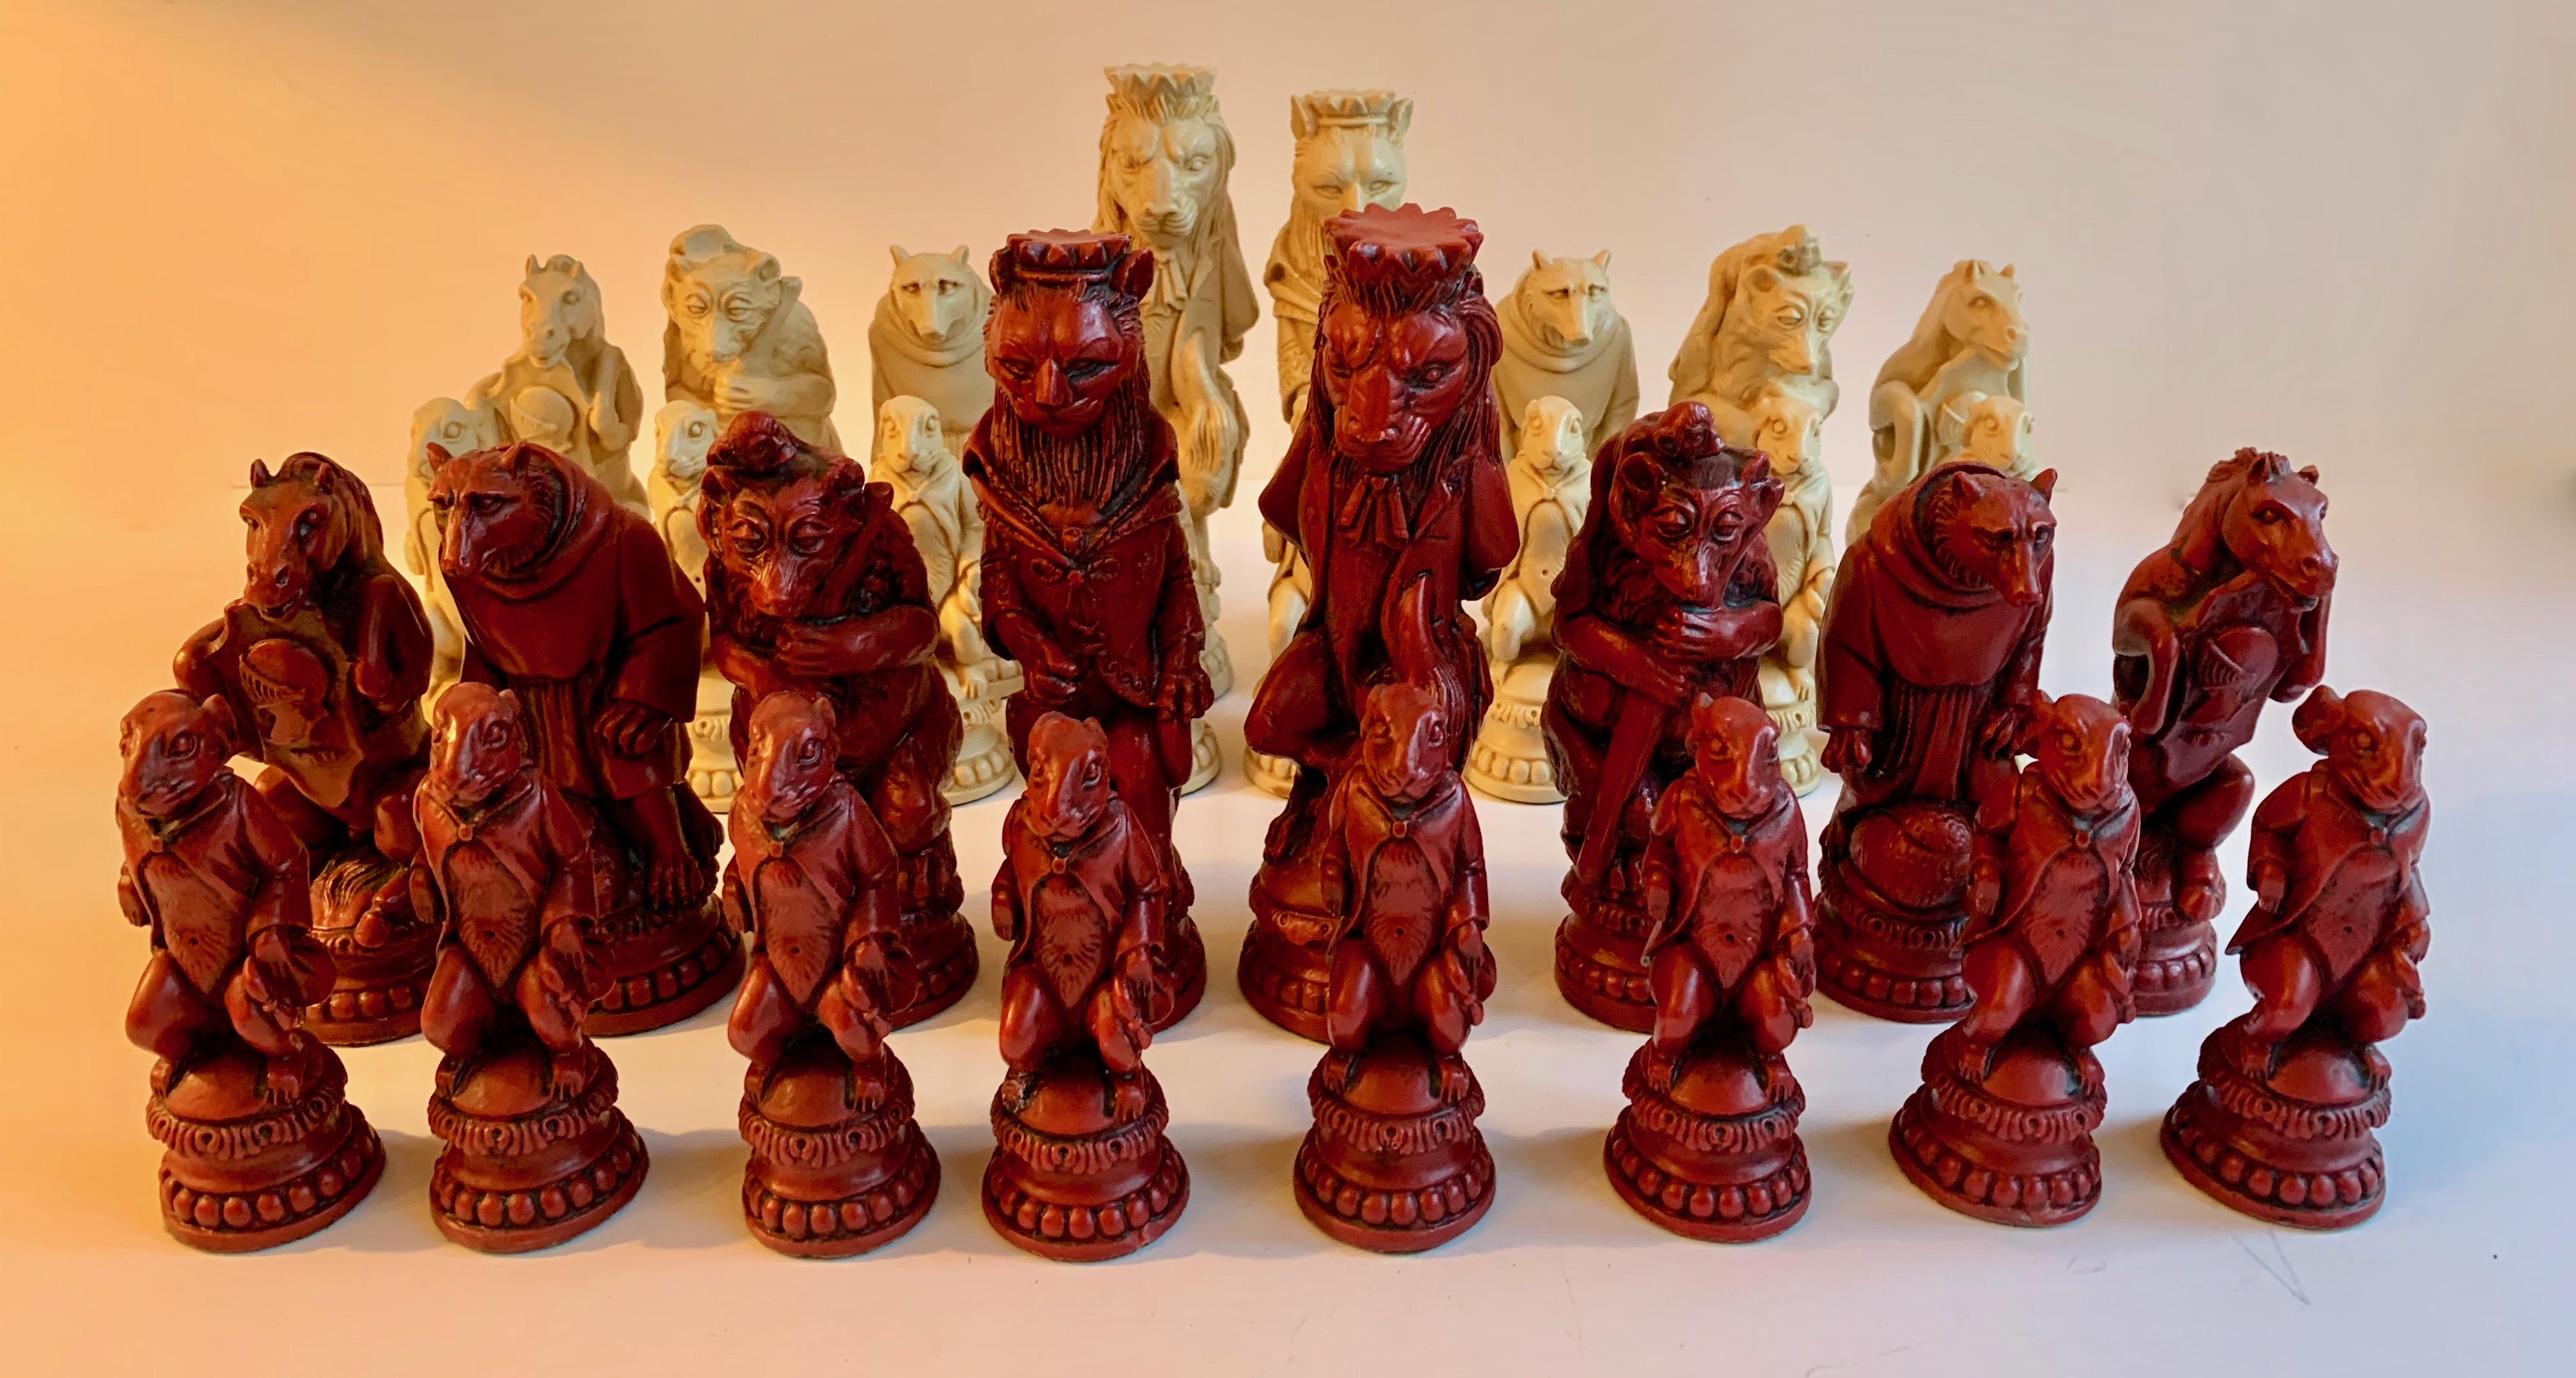 32 wonderful Resin oversized woodland animals - Bears, lions, badgers, rabbits, etc.- a very decorative set, and a nice look and weight. Some loss on a few pieces, however, due to the busy and intricate design, not terribly noticeable or offensive. 